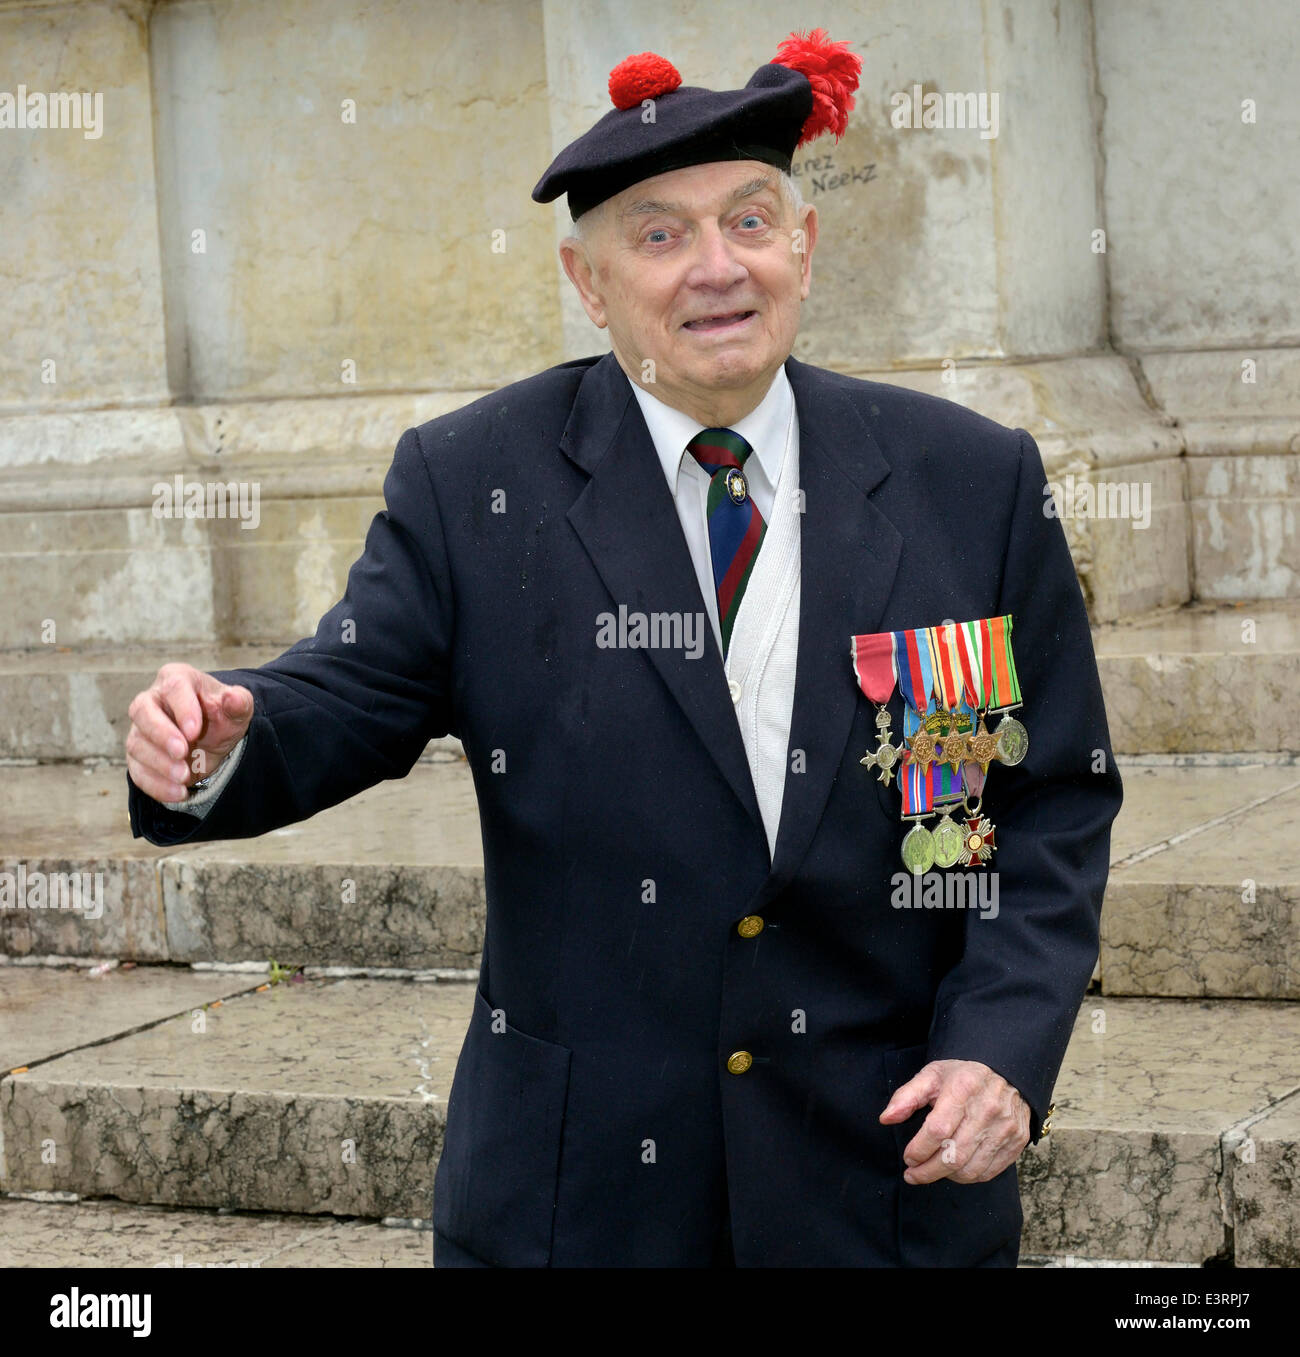 Manchester, UK. 28th June, 2014. 91 year-old John Clarke, a member of the Black Watch Association attends the Manchester Armed Forces Day in Piccadilly Gardens. John, a holder of the MBE and Polish Gold Cross, is possibly the last surviving soldier from the Battle of Monte Cassino in Italy during WW2. Armed Forces Day Manchester, UK Credit:  John Fryer/Alamy Live News Stock Photo